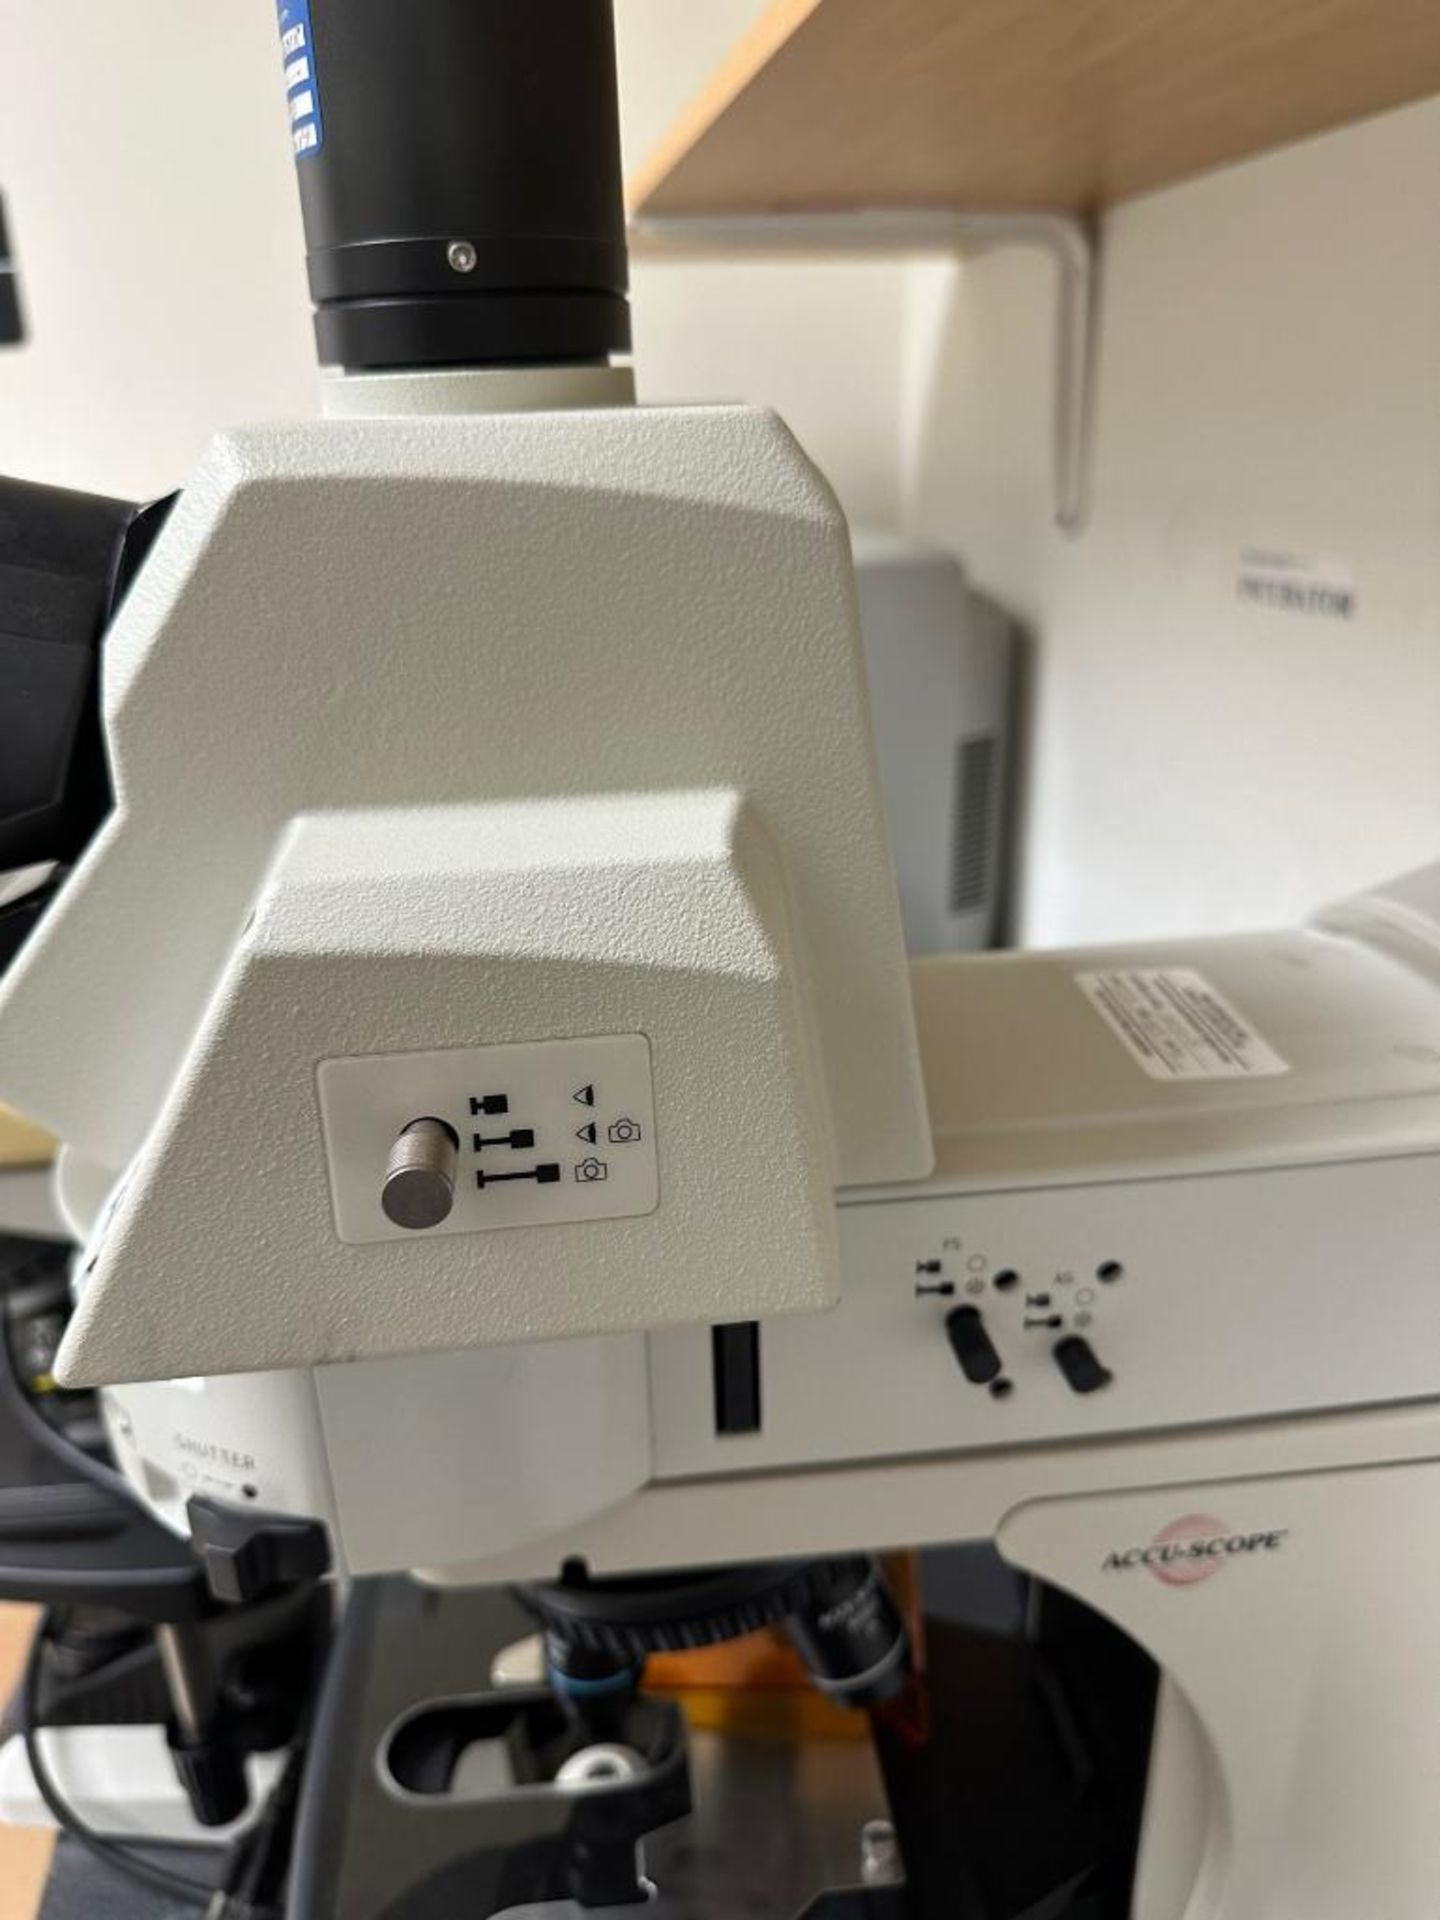 ACCU-SCOPE LAB MICROSCOPE WITH 5 OBJECTIVES - Image 3 of 6